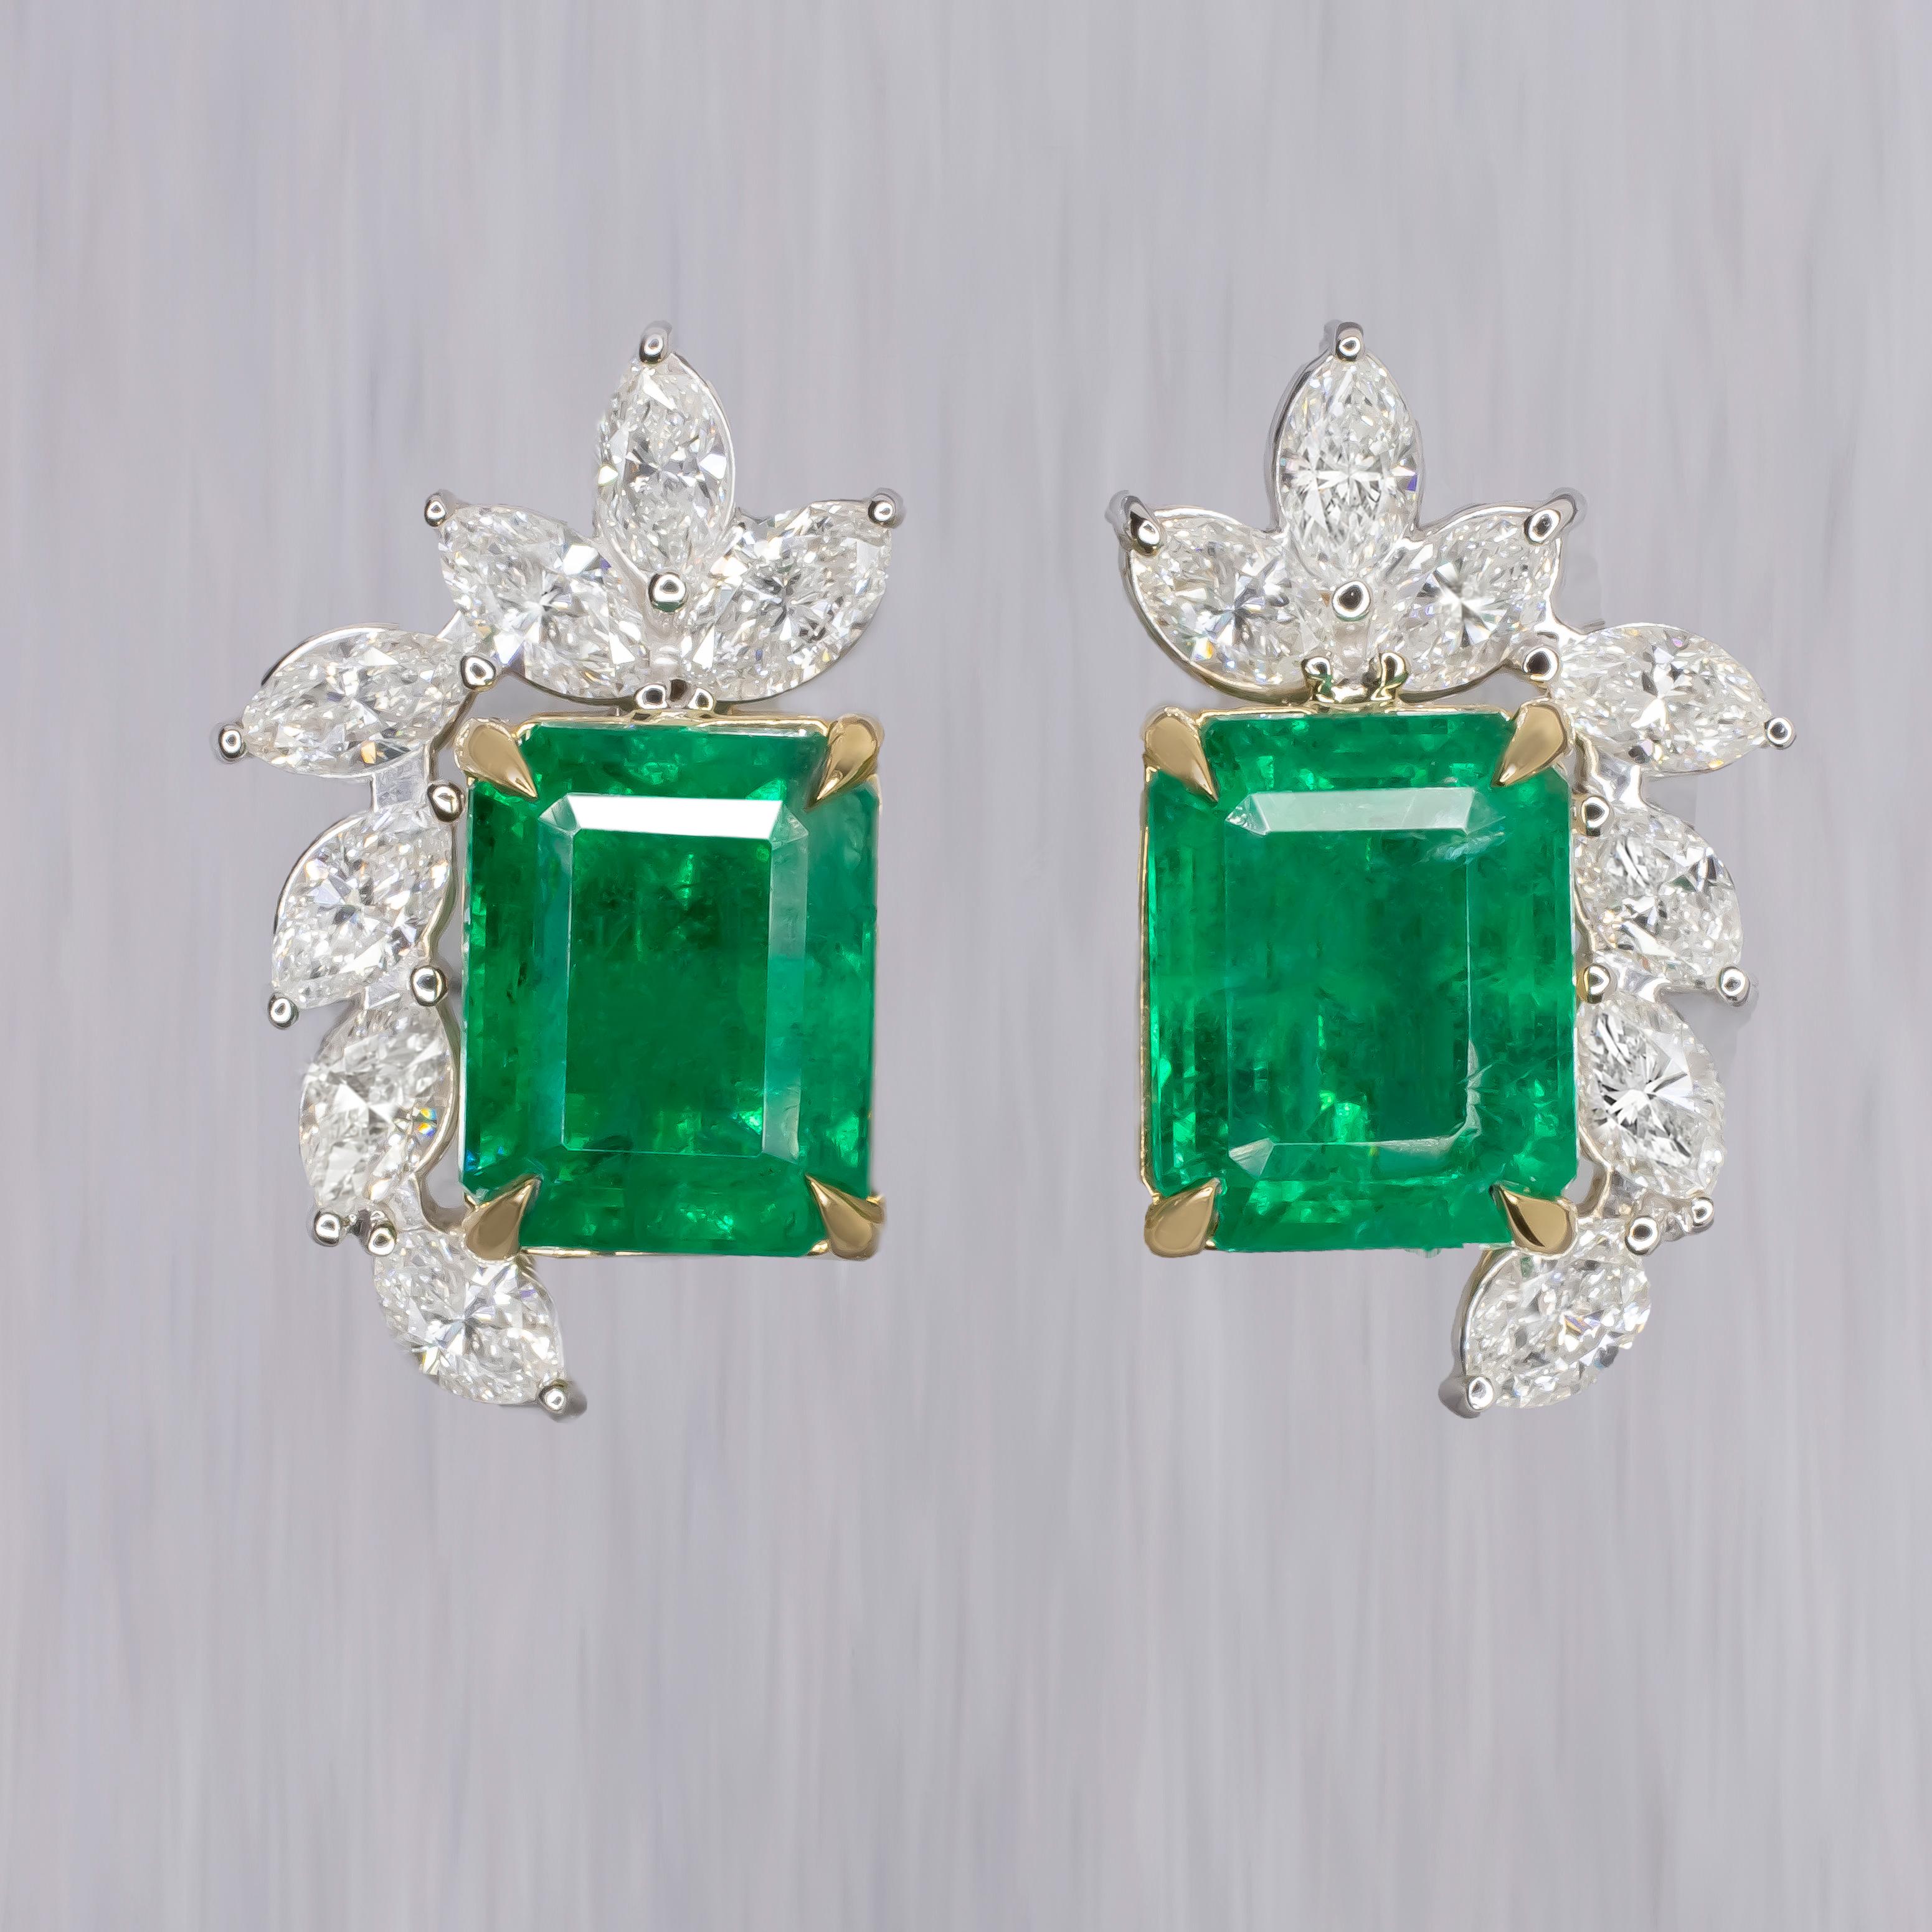 GIA and IGI Certified 7 Carat Vivid Green Emerald and Marquise Diamonds Earrings For Sale 2